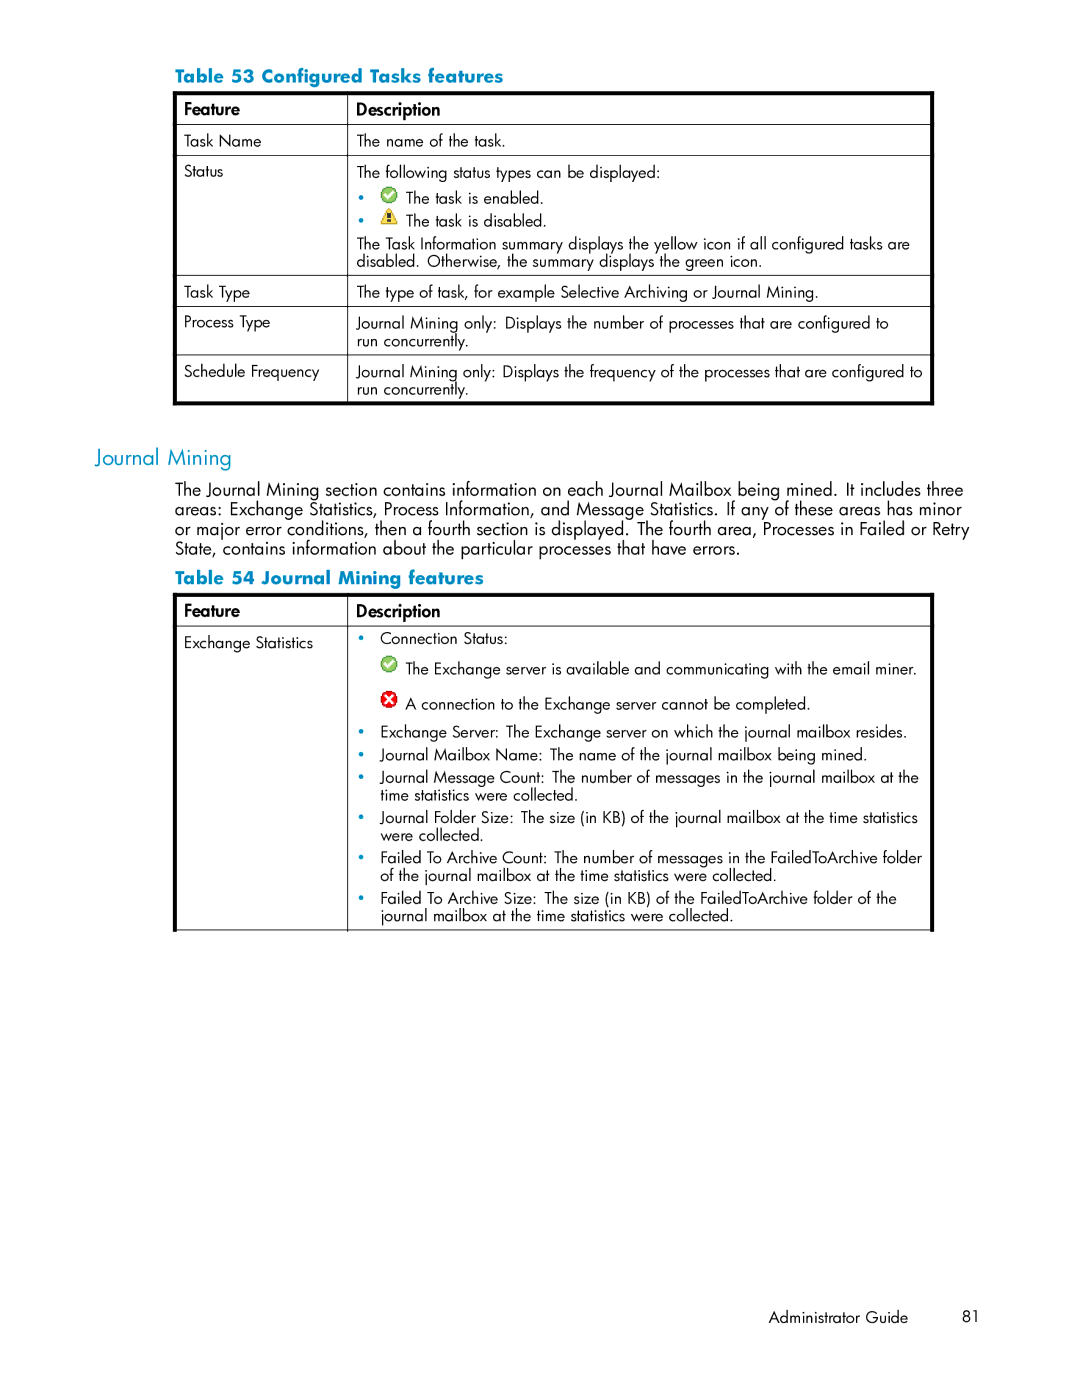 HP RISS Components manual Conﬁgured Tasks features, Journal Mining features 